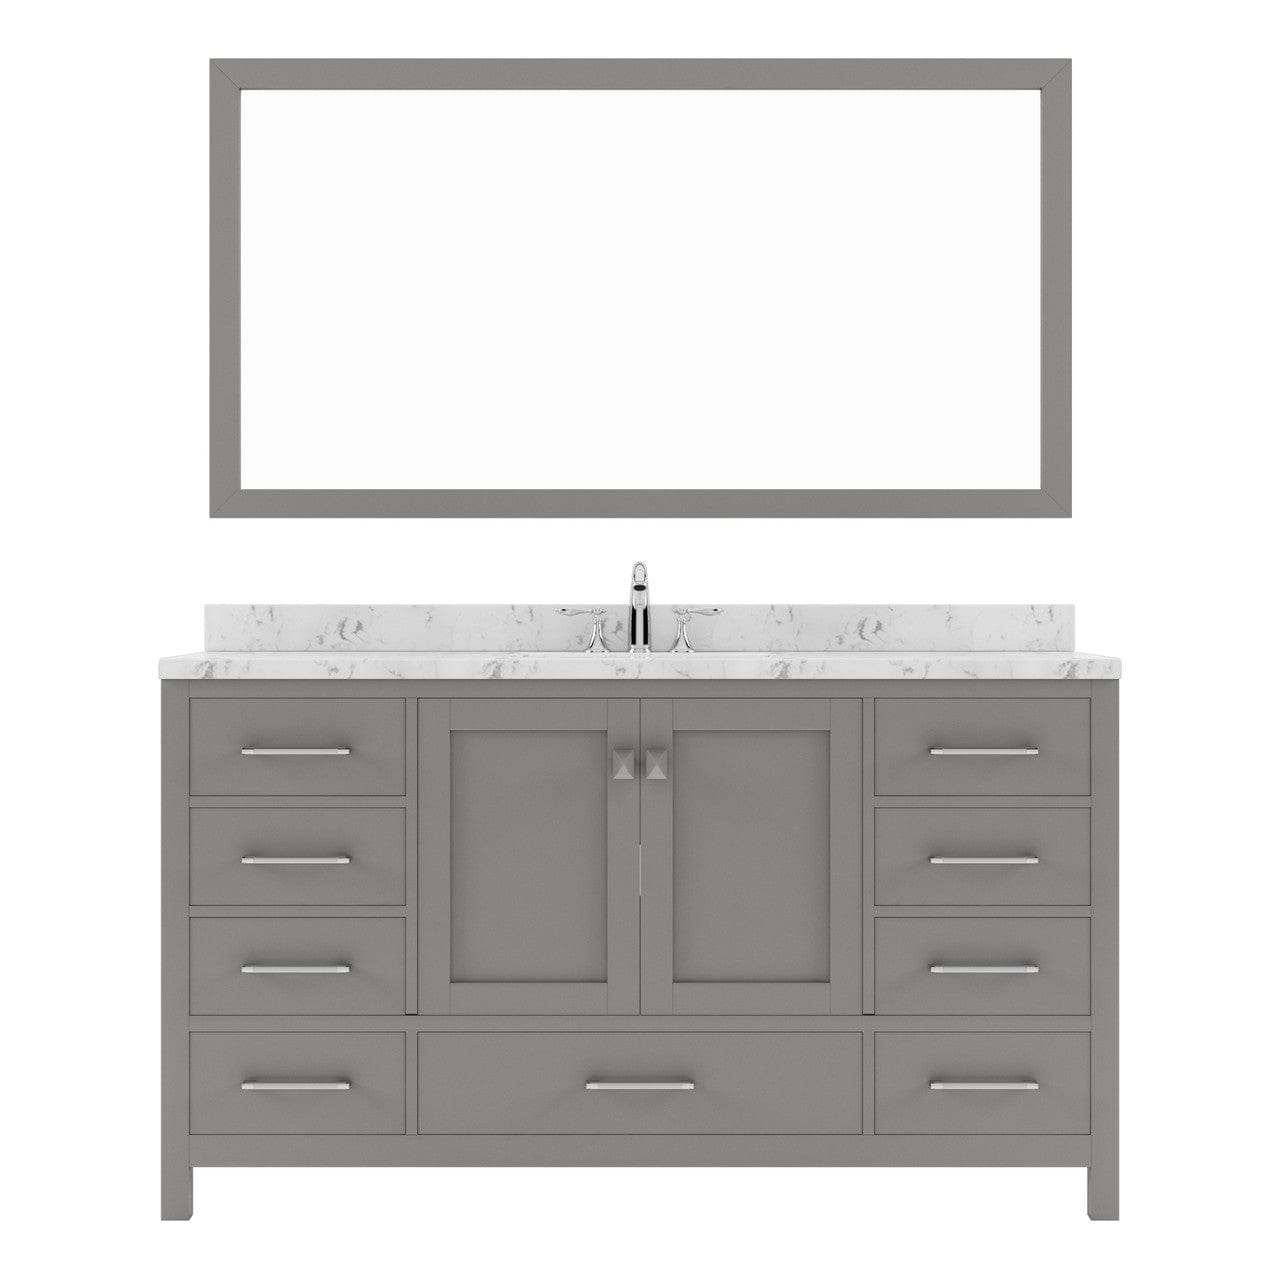 Caroline Avenue 60" Single Bath Vanity in Cashmere Gray with Quartz Top and Sink white background